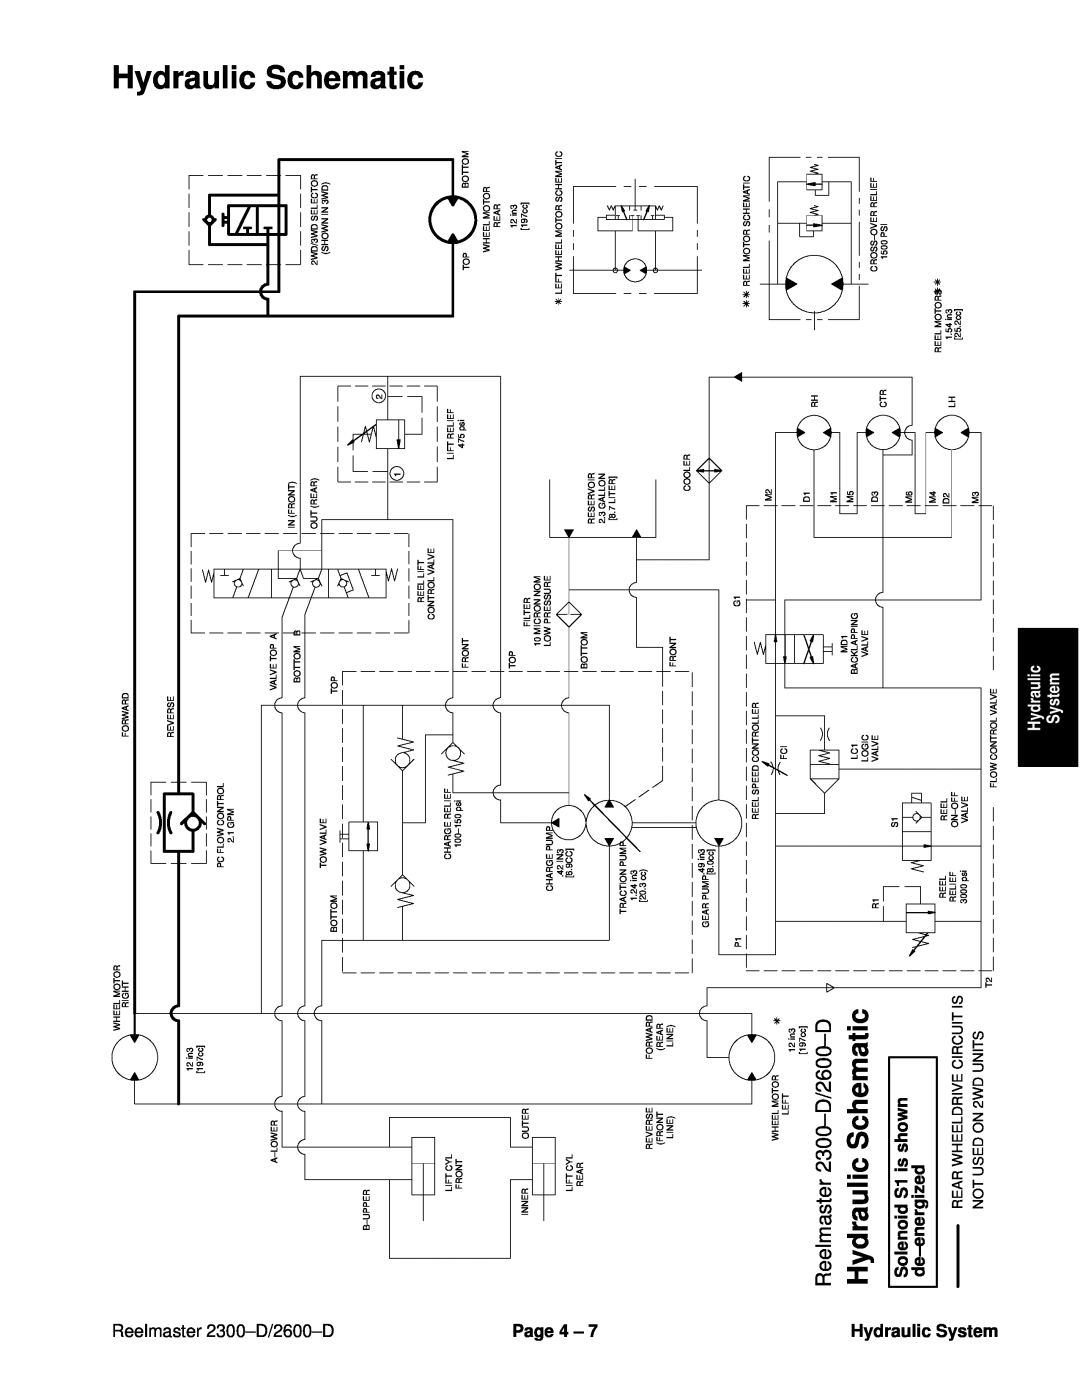 Toro 2600D Hydraulic Schematic, Reelmaster 2300±D/2600±D, Page 4 ±, Solenoid S1 is shown de±energized, Hydraulic System 